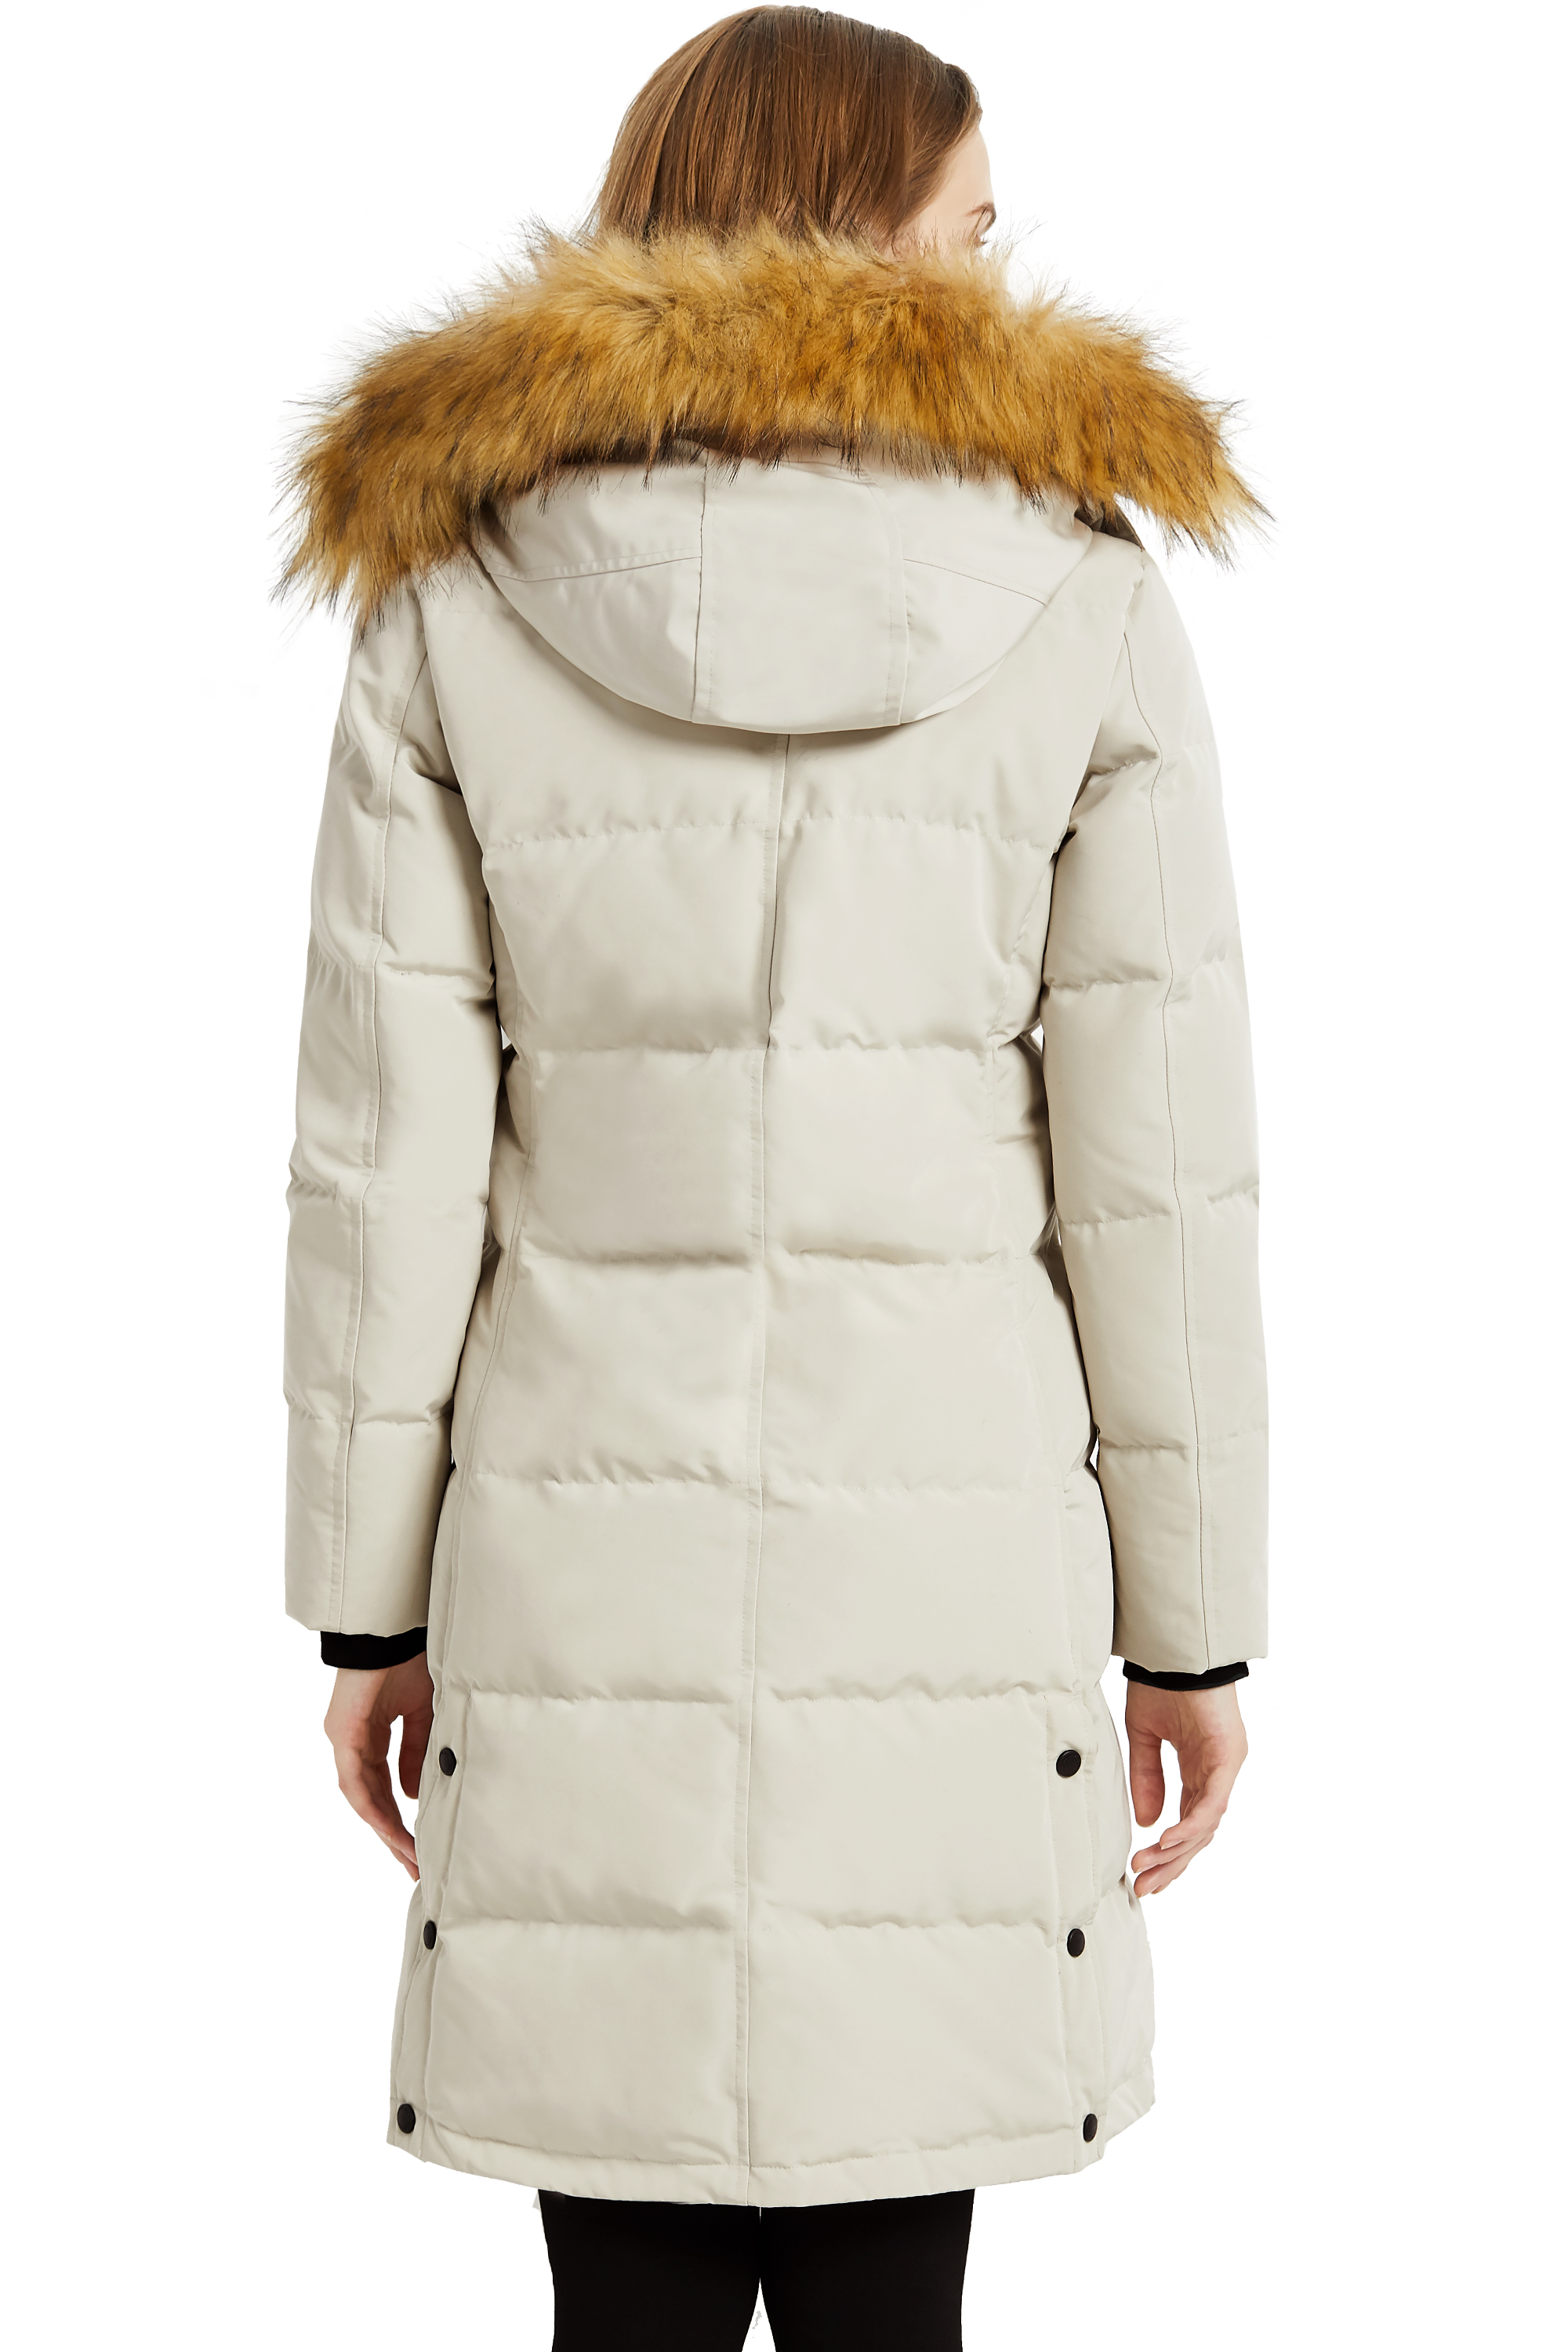 Orolay Women's Down Jacket Winter Long Coat Windproof Puffer Jacket with Fur Hood - image 2 of 5